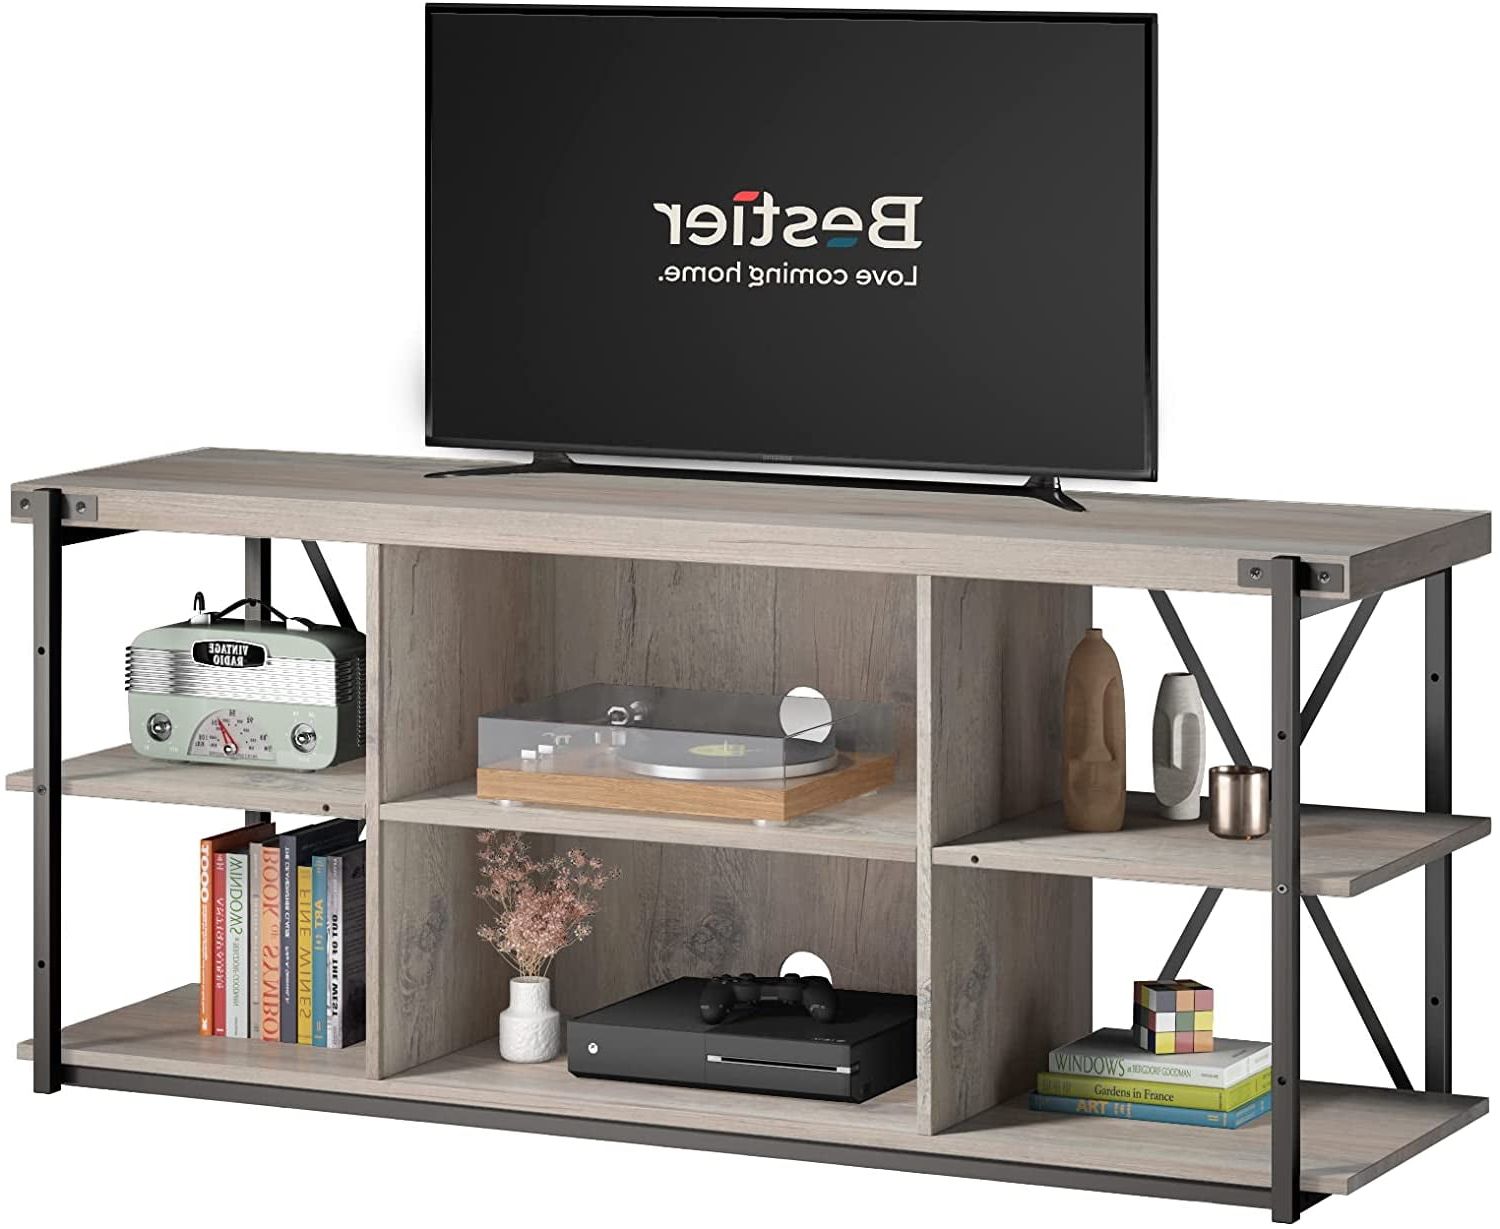 Bestier Tv Stand For Tvs Up To 75" Intended For Newest Bestier Farmhouse Tv Stand With Storage Shelves For Tvs Up To 65", Wash (View 7 of 15)